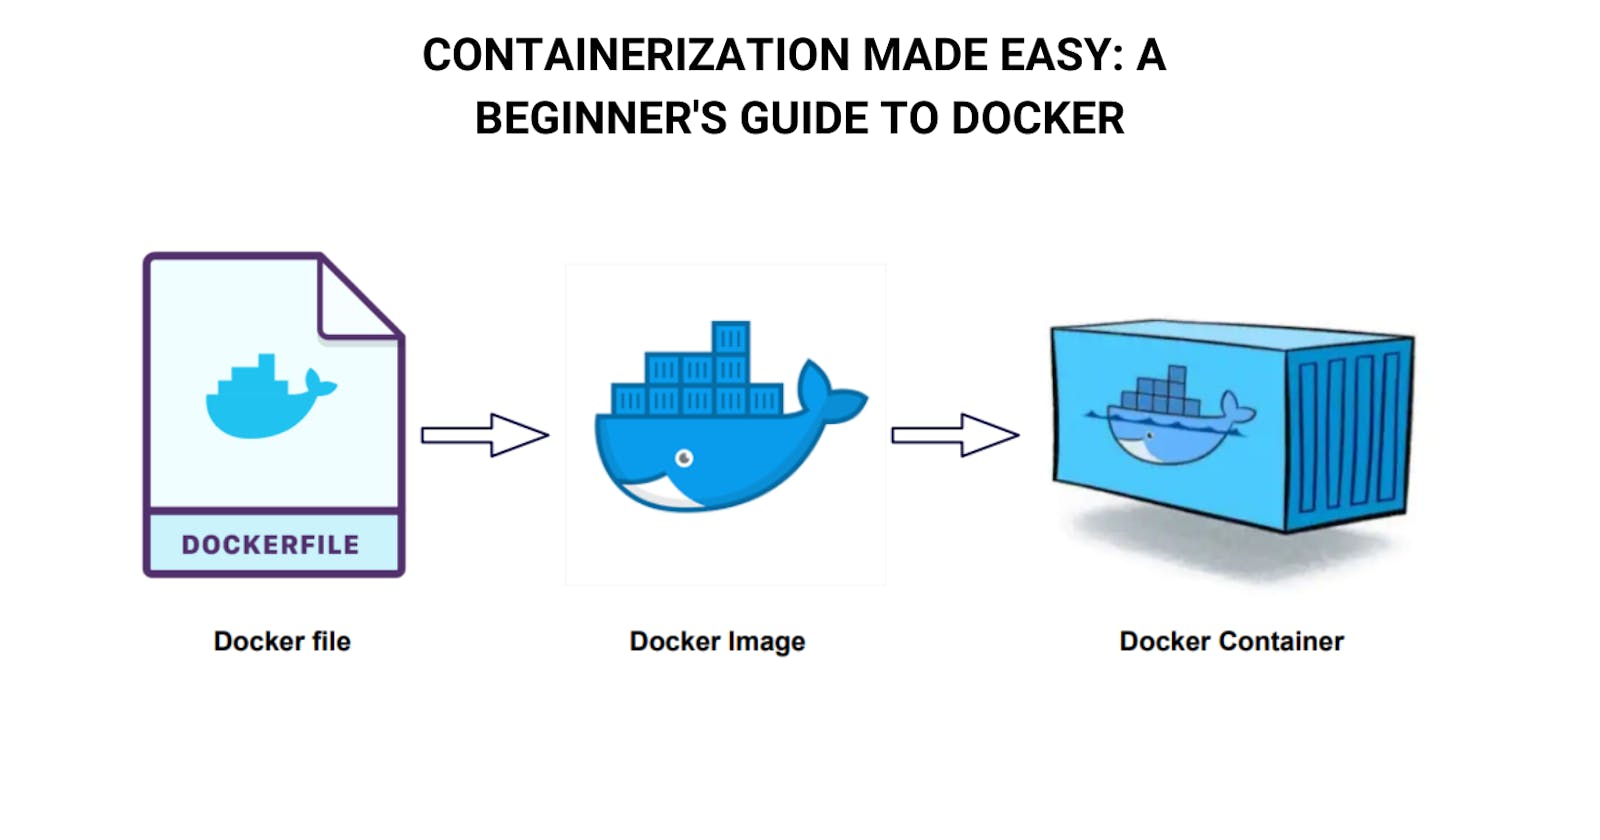 Containerization Made Easy: A Beginner's Guide to Docker